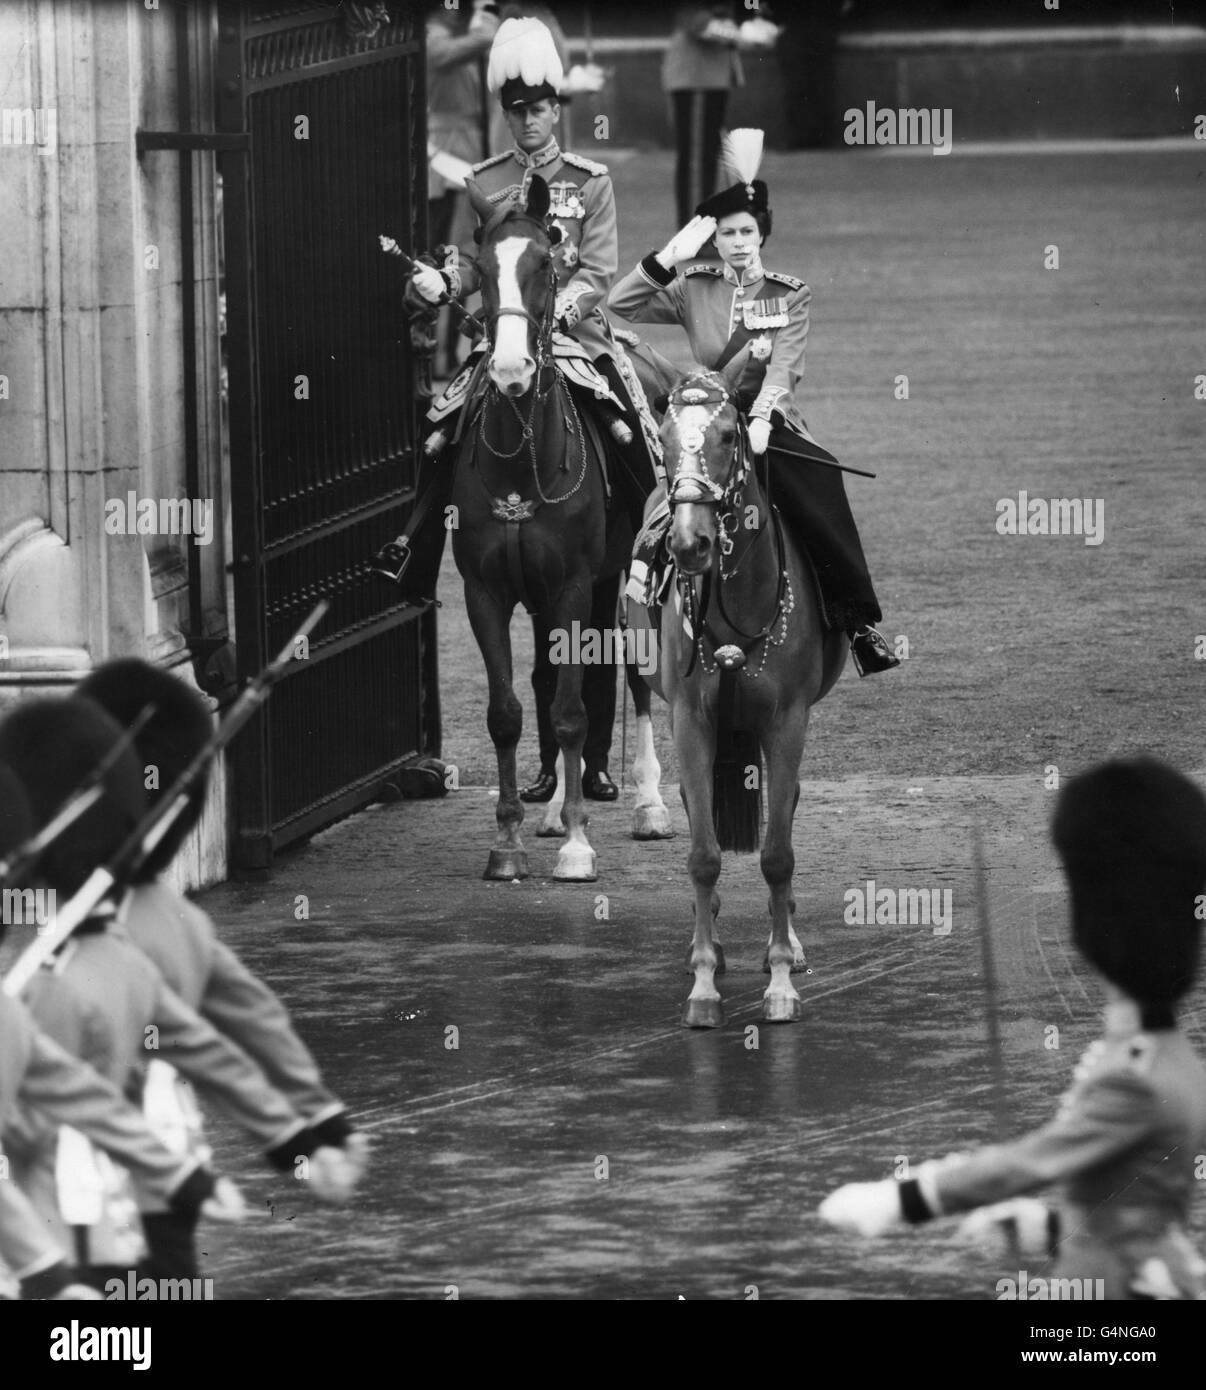 Queen Elizabeth II, riding her horse Winston, takes the salute at the gates of Buckingham Palace as Foot Guards of the Household Brigade march past. Behind is the Duke of Edinburgh, in Field Marshall uniform. Stock Photo